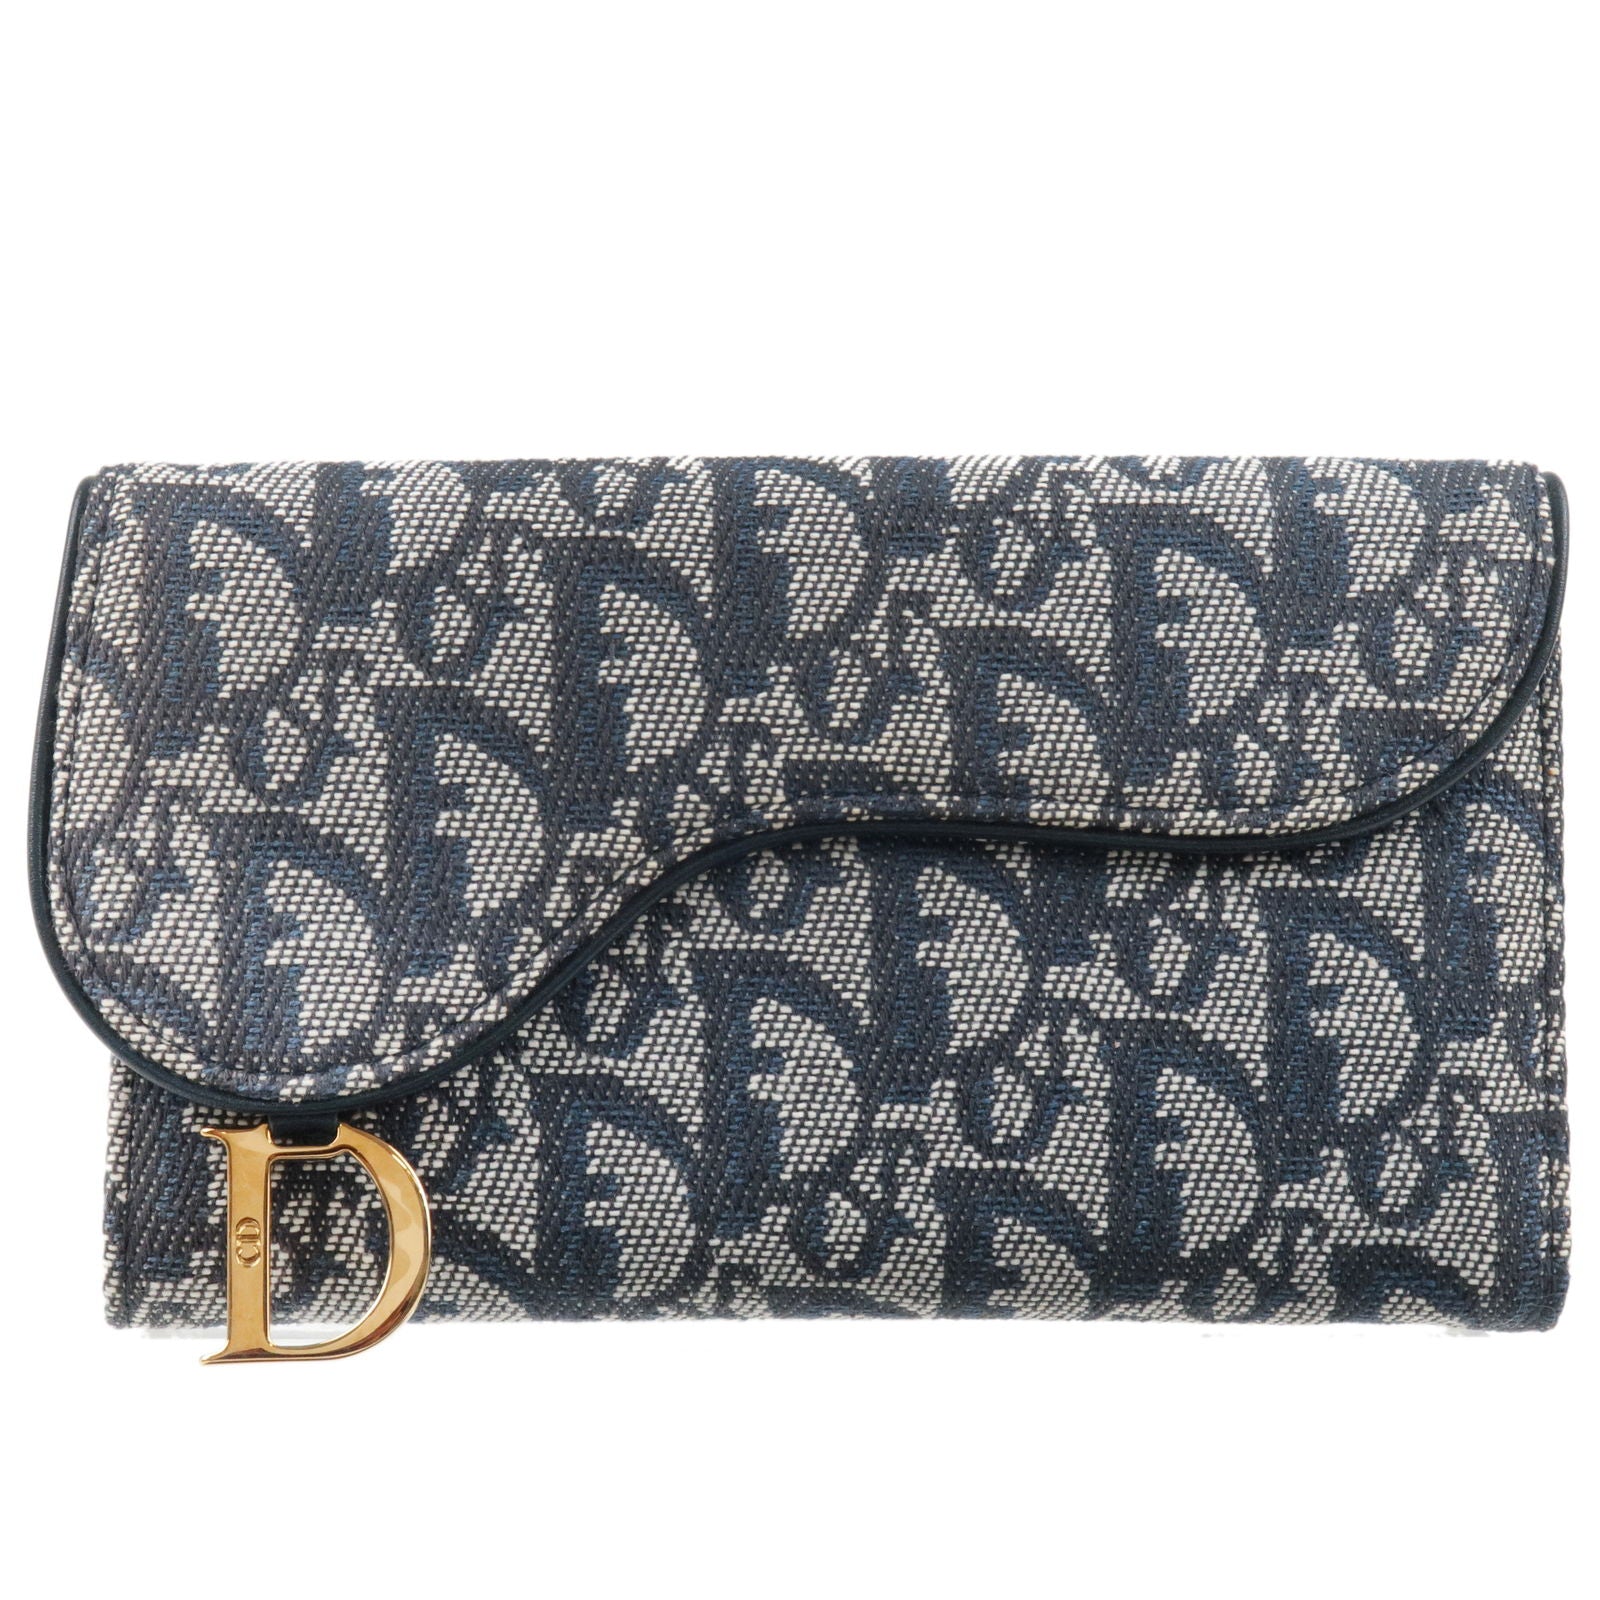 Christian-Dior-Trotter-Canvas-Leather-Saddle-Tri-fold-Wallet-Navy